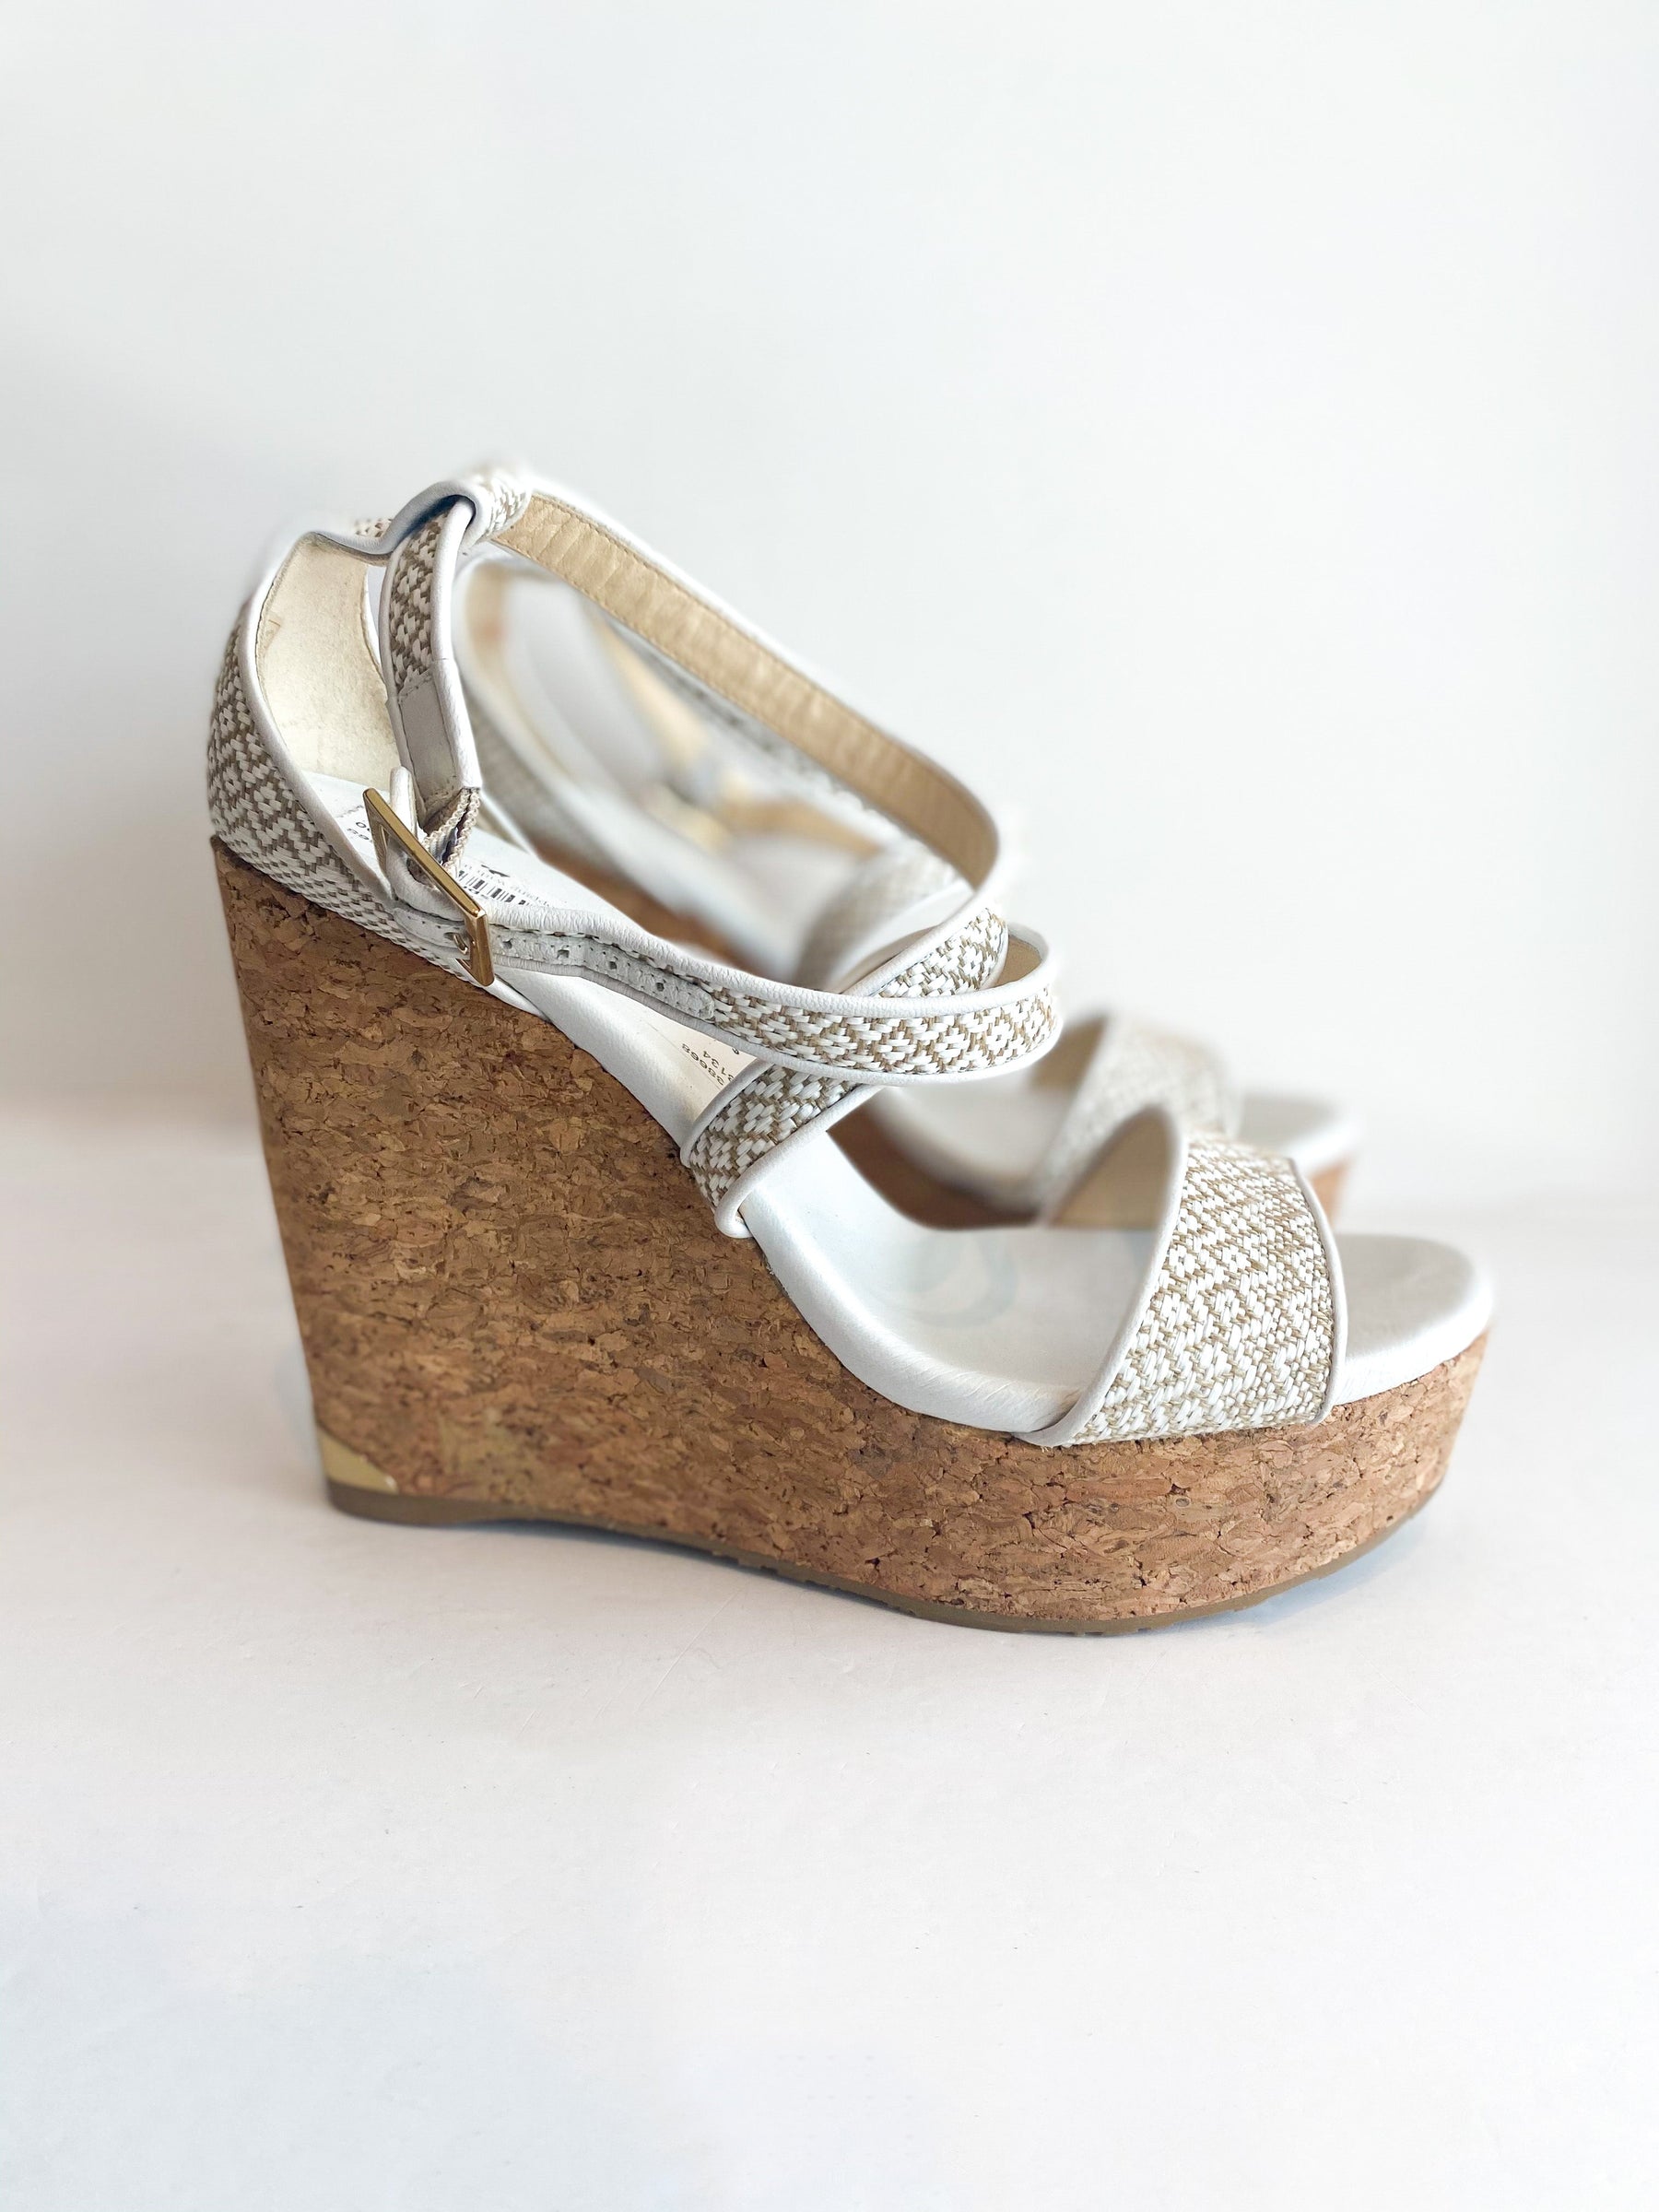 Jimmy Choo Printed Wedges Embroidered Tan White Cork Side of Shoes